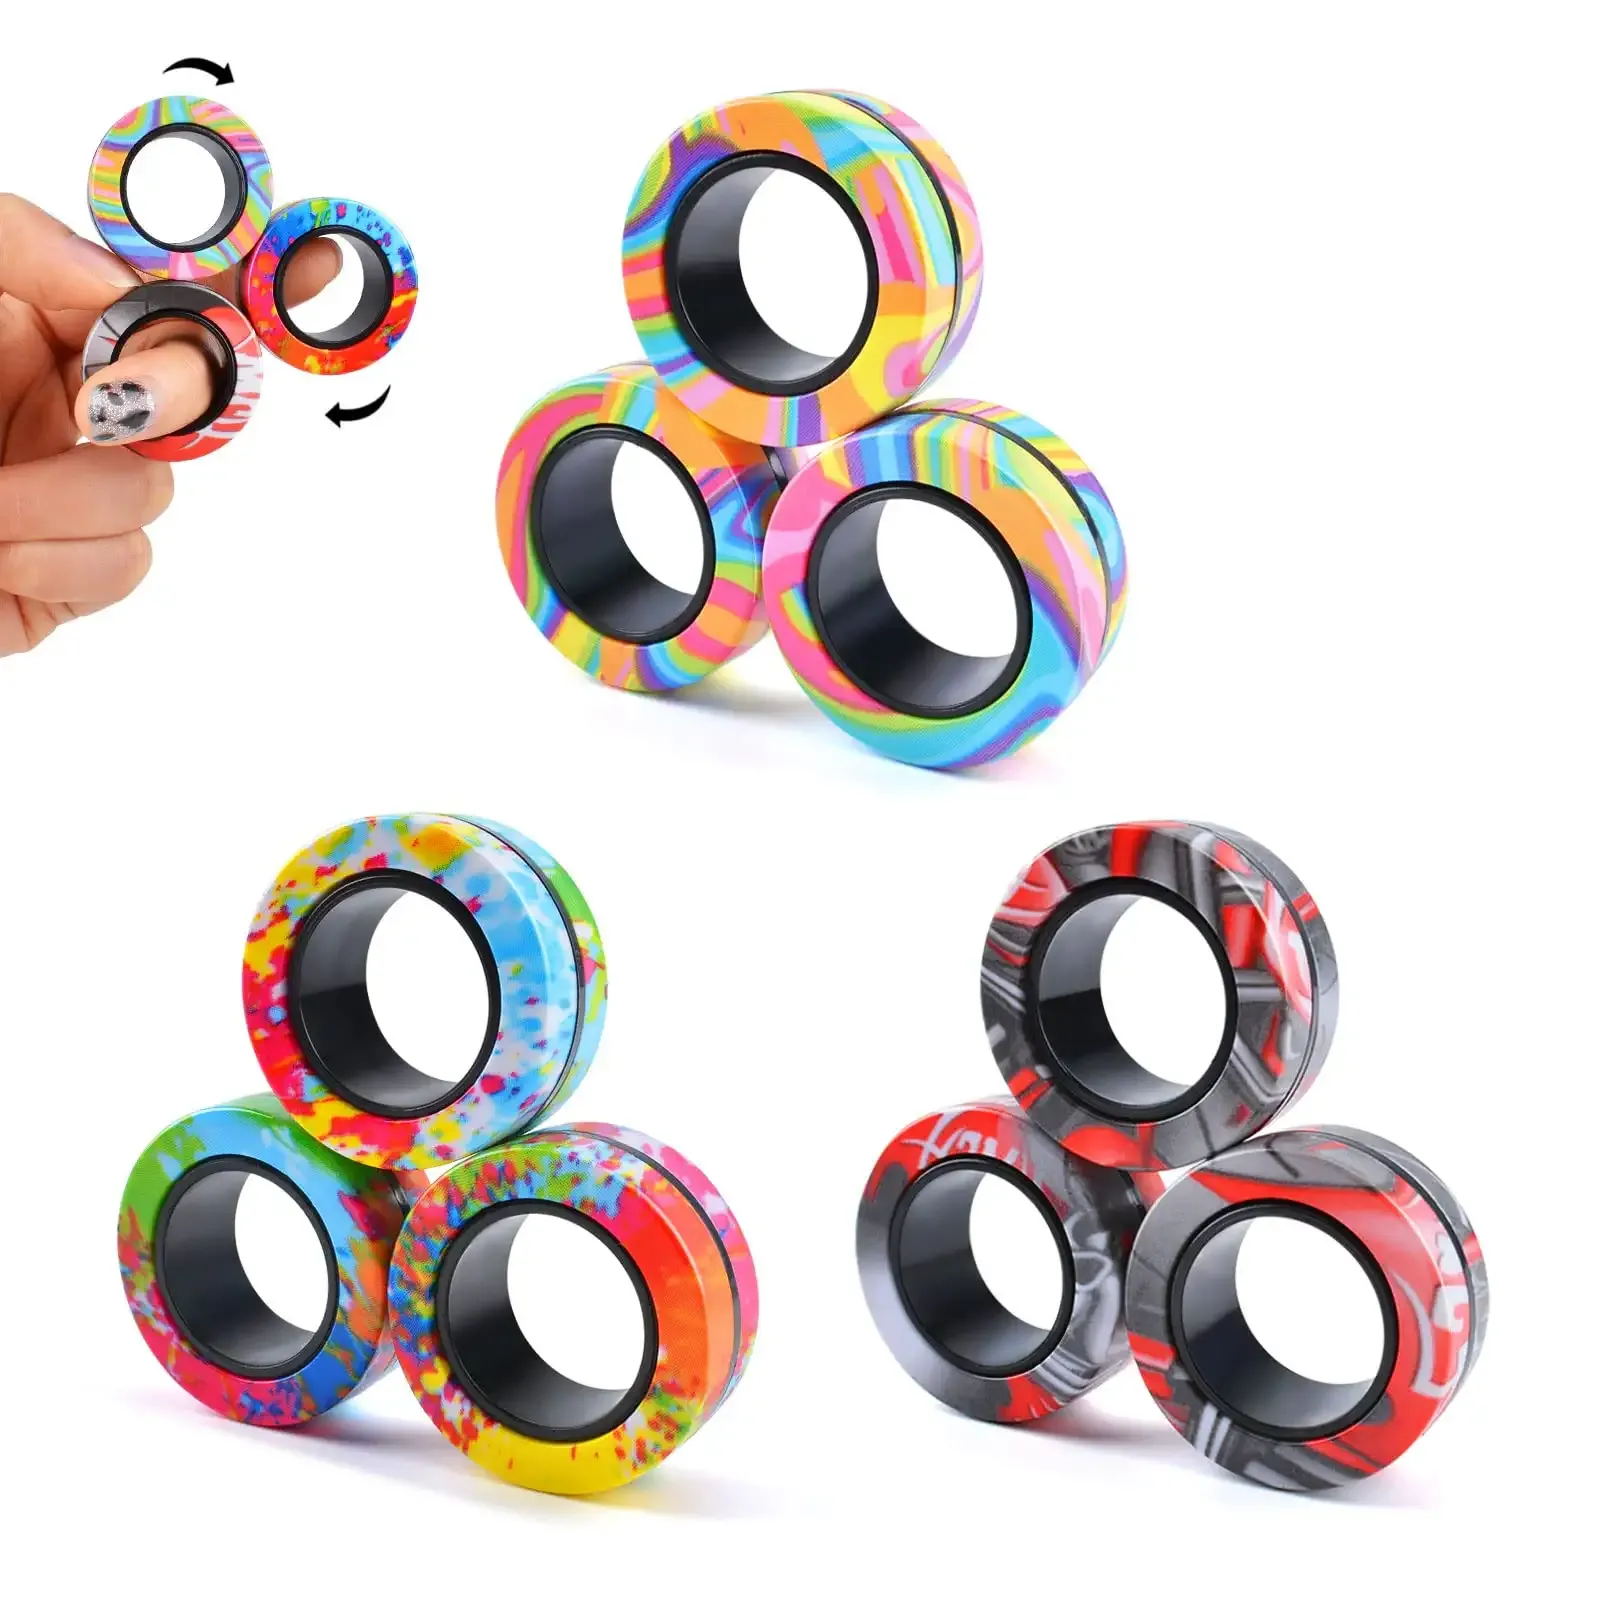 3Pcs Fingears Magnetic Rings Fidget Spinner Toy | Stress, Anxiety Relief  Magnetic Spinner Ring - Walmart.com